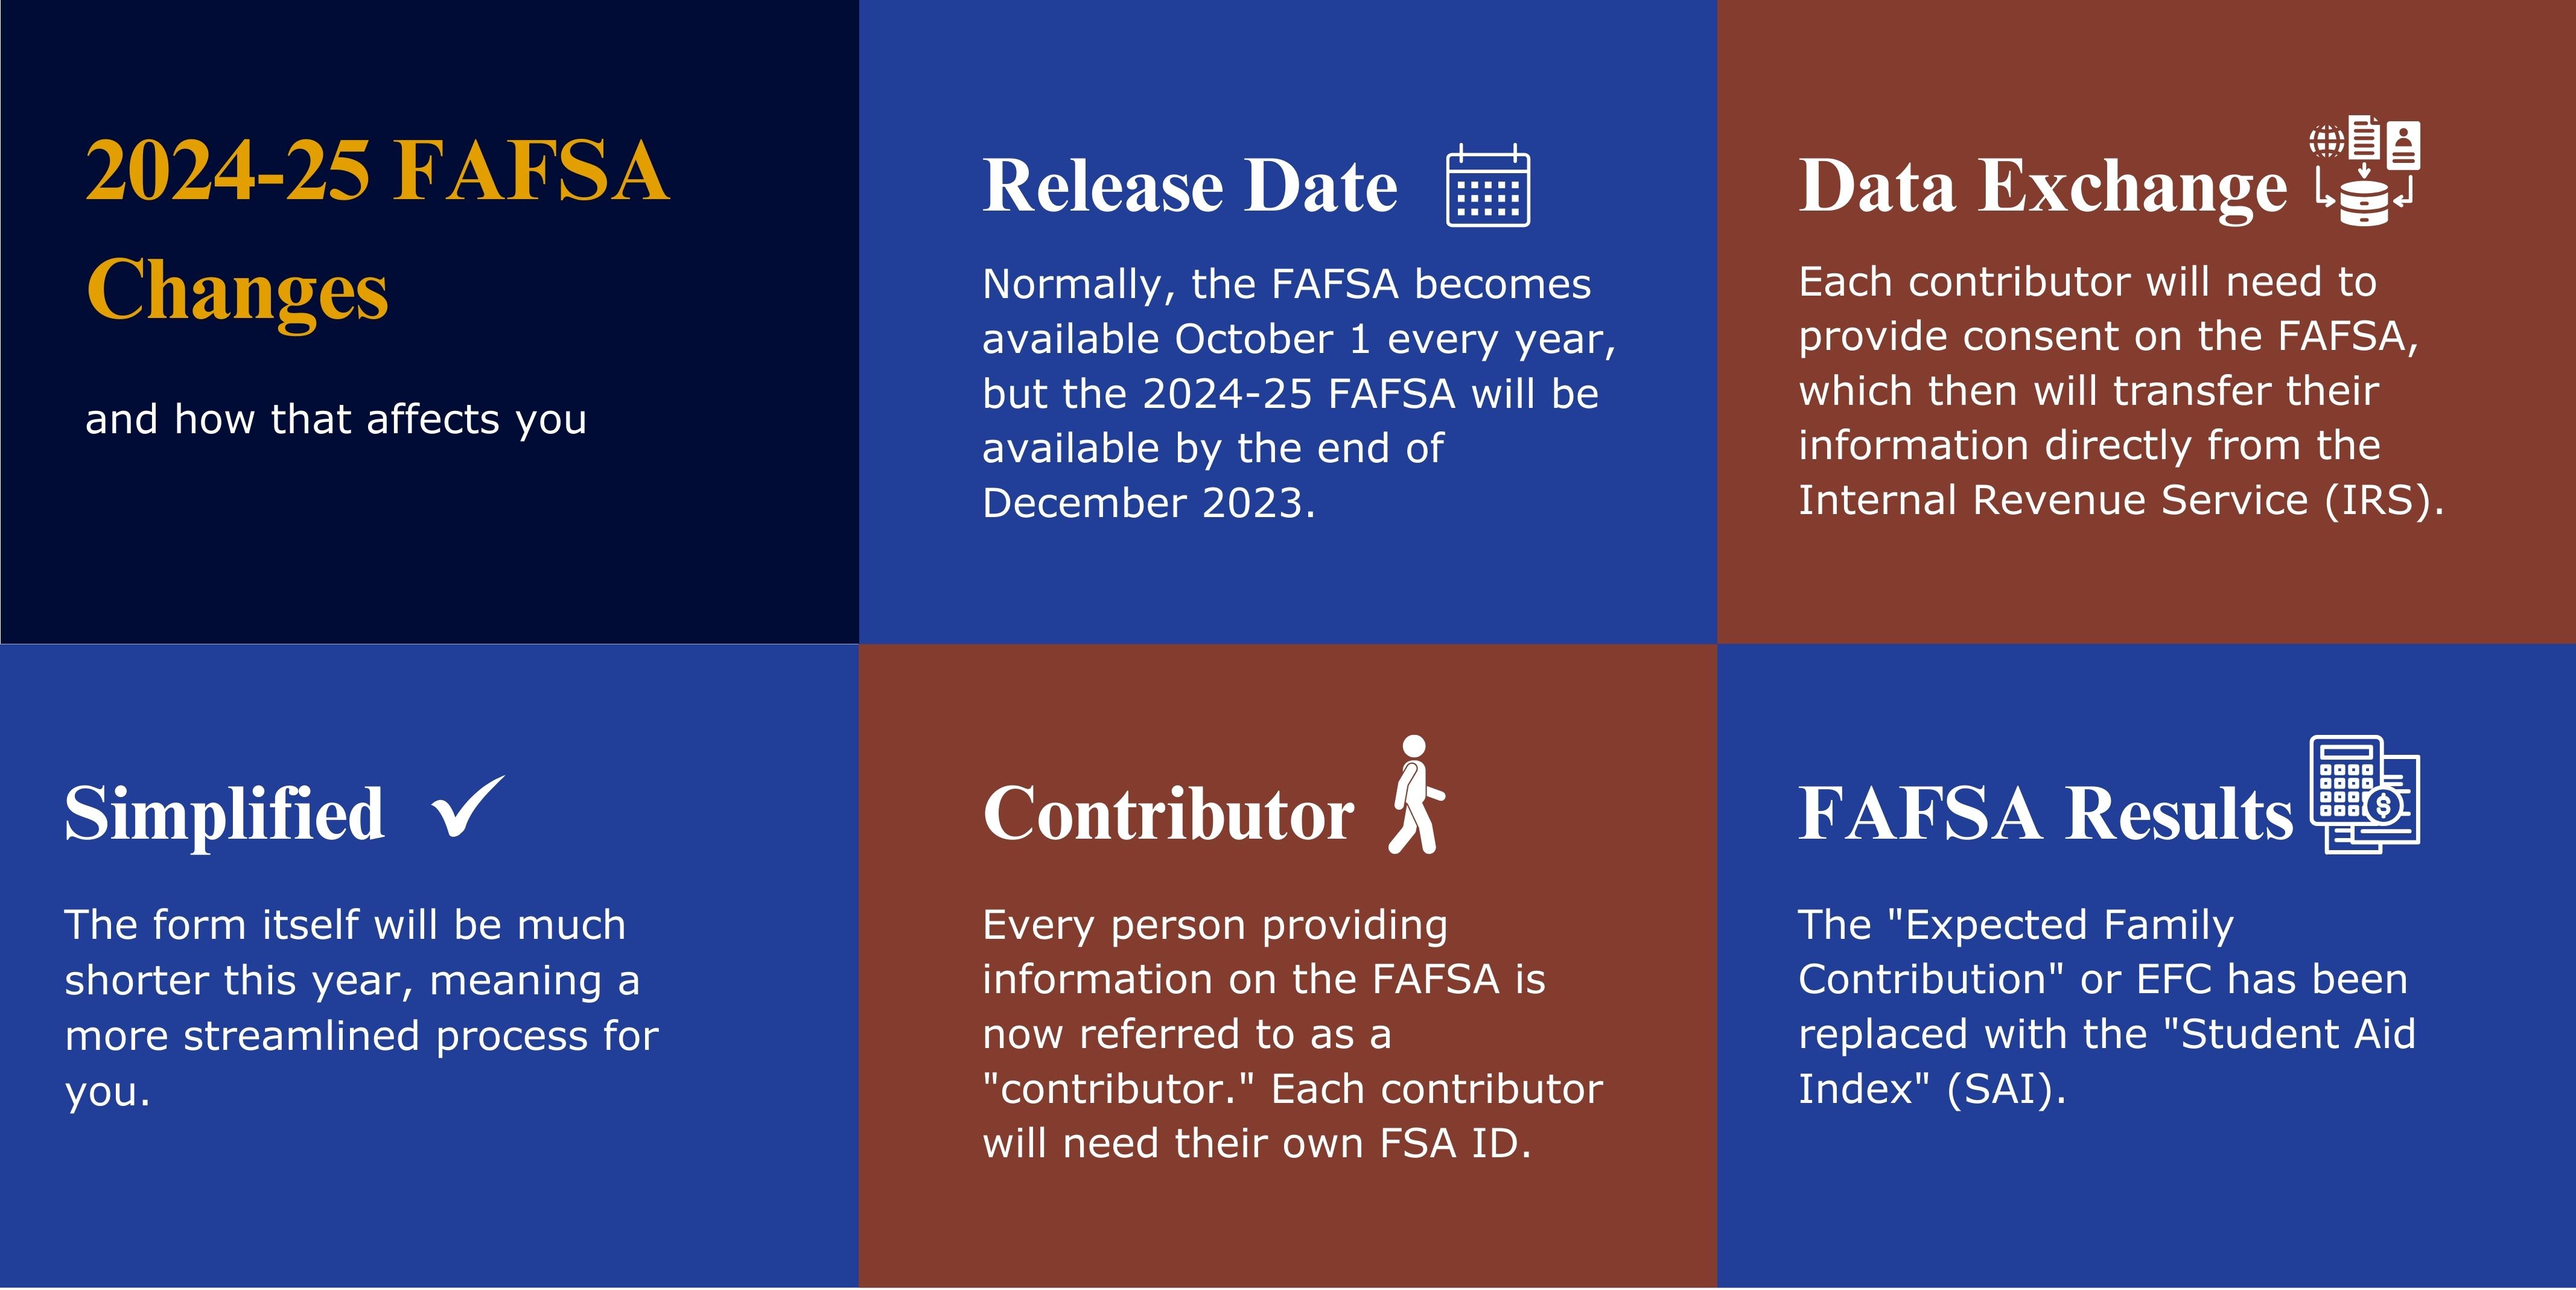 24-25 FAFSA Updates. Simplified application process; Release Date in December 2023; Use of Data exchange to get information from the IRS after providing consent; Each user is now called a Contributor and must create an FSA ID; FAFSA Results are now called the Student Aid Index (SAI) instead of the Estimated Family Contribution (EFC).